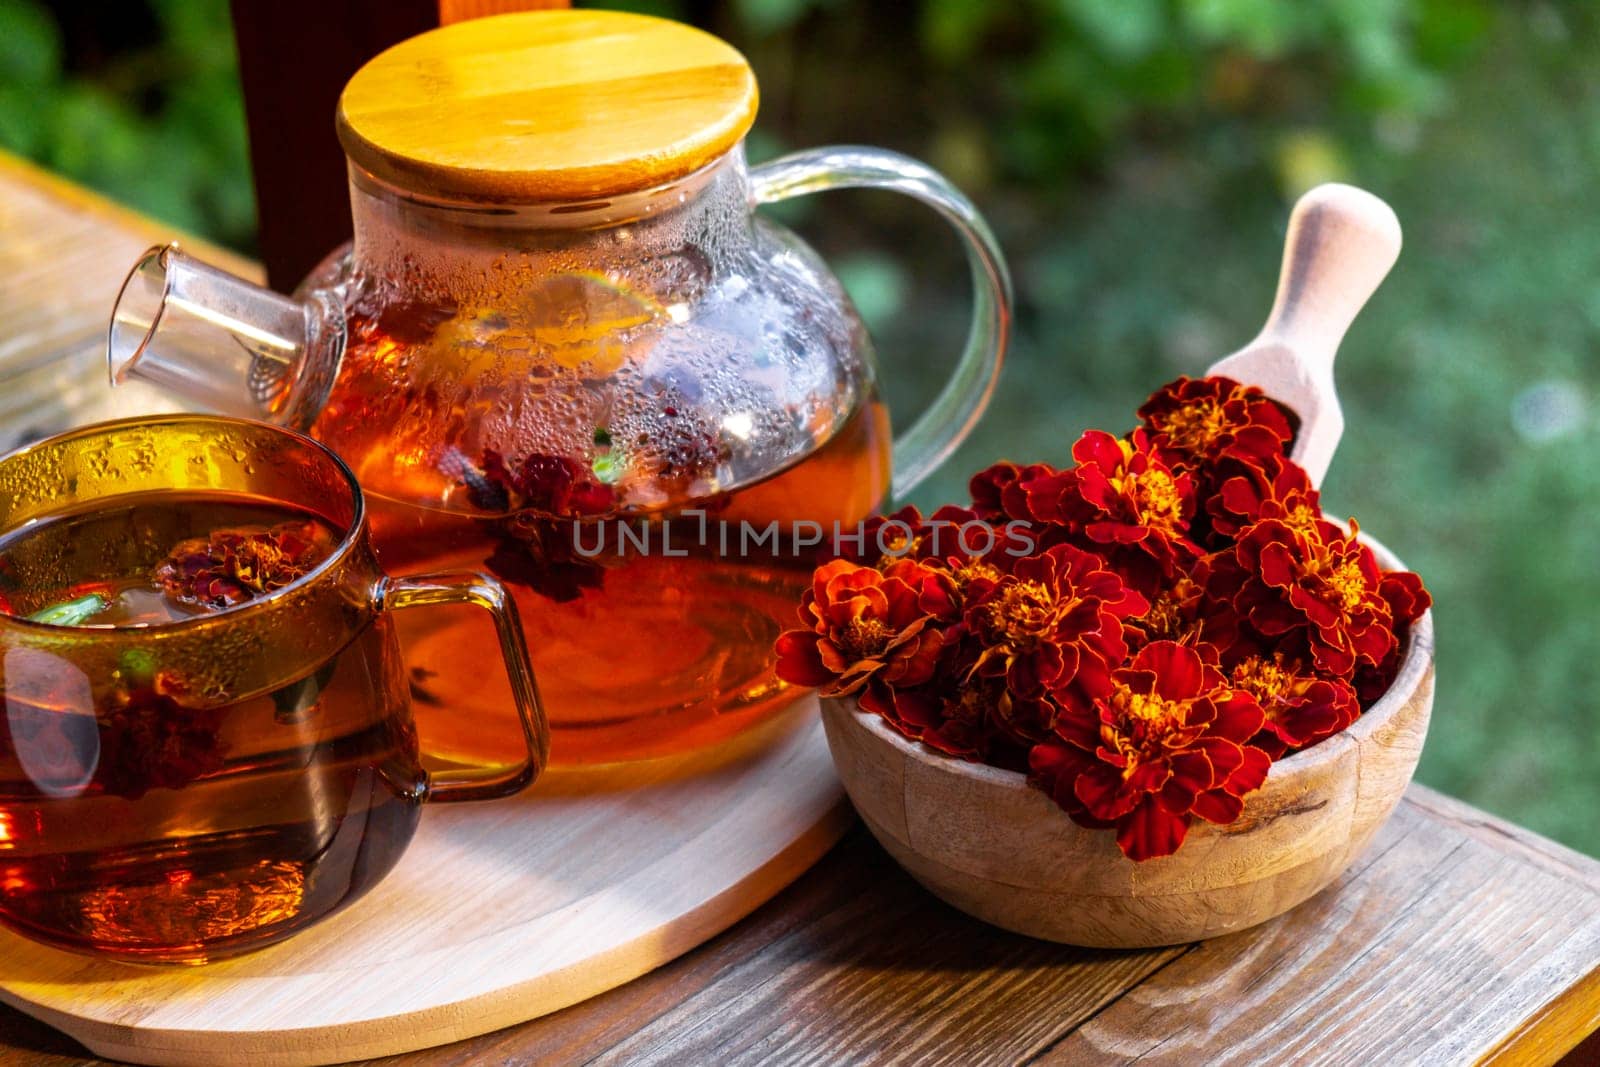 Marigold tea still life on table in green garden background. Healthy hot drink benefits. Natural organic aromatic drink in cup. Home-grown immunity-boosting herbs for tea. Autumn winter warming calming drink